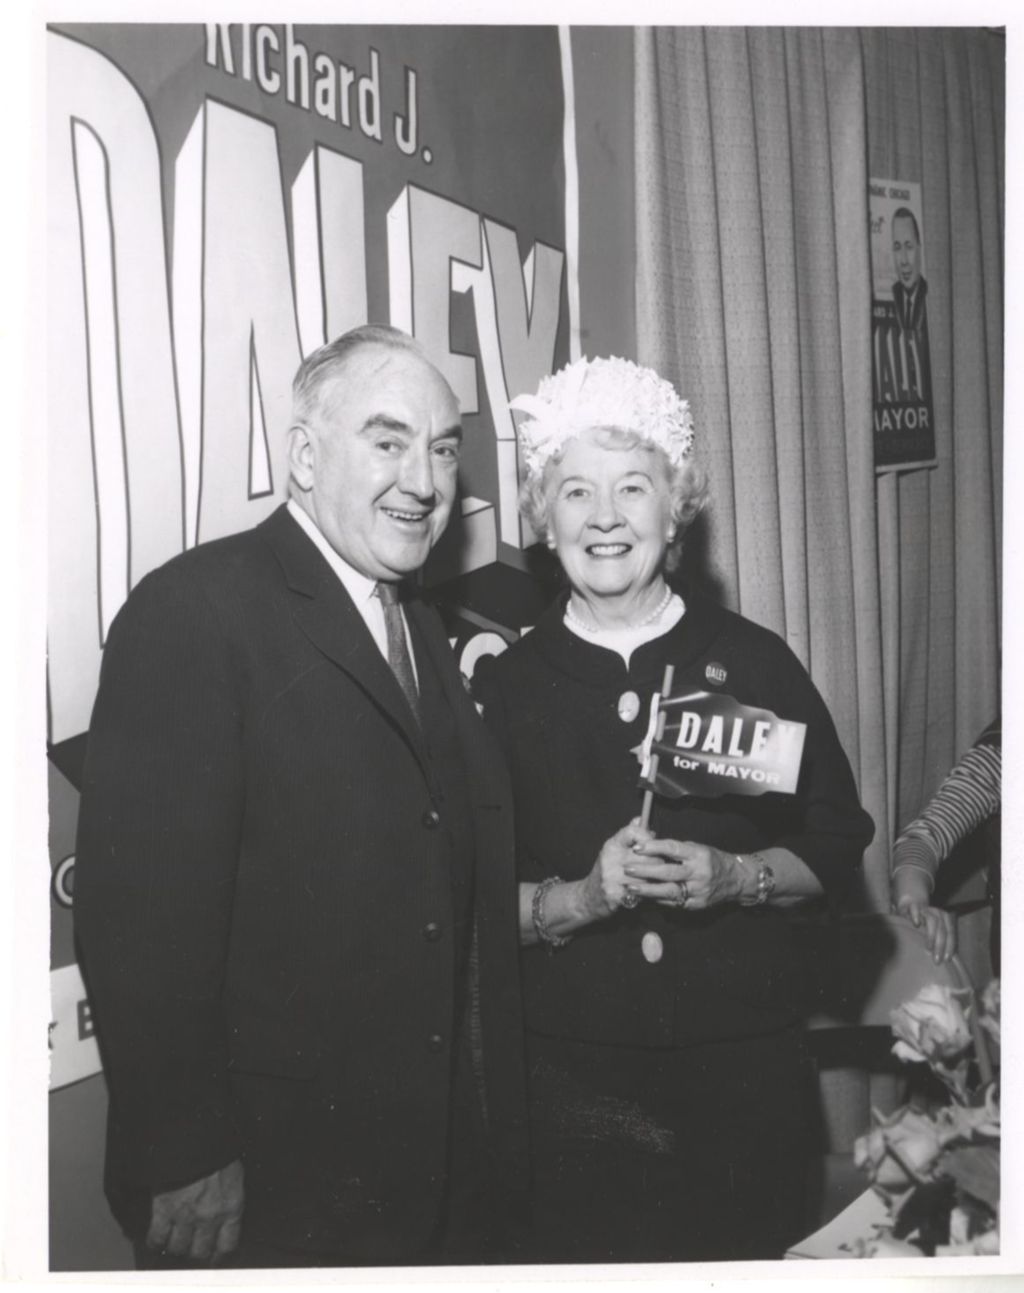 Miniature of William Lynch and a Daley supporter at a campaign event